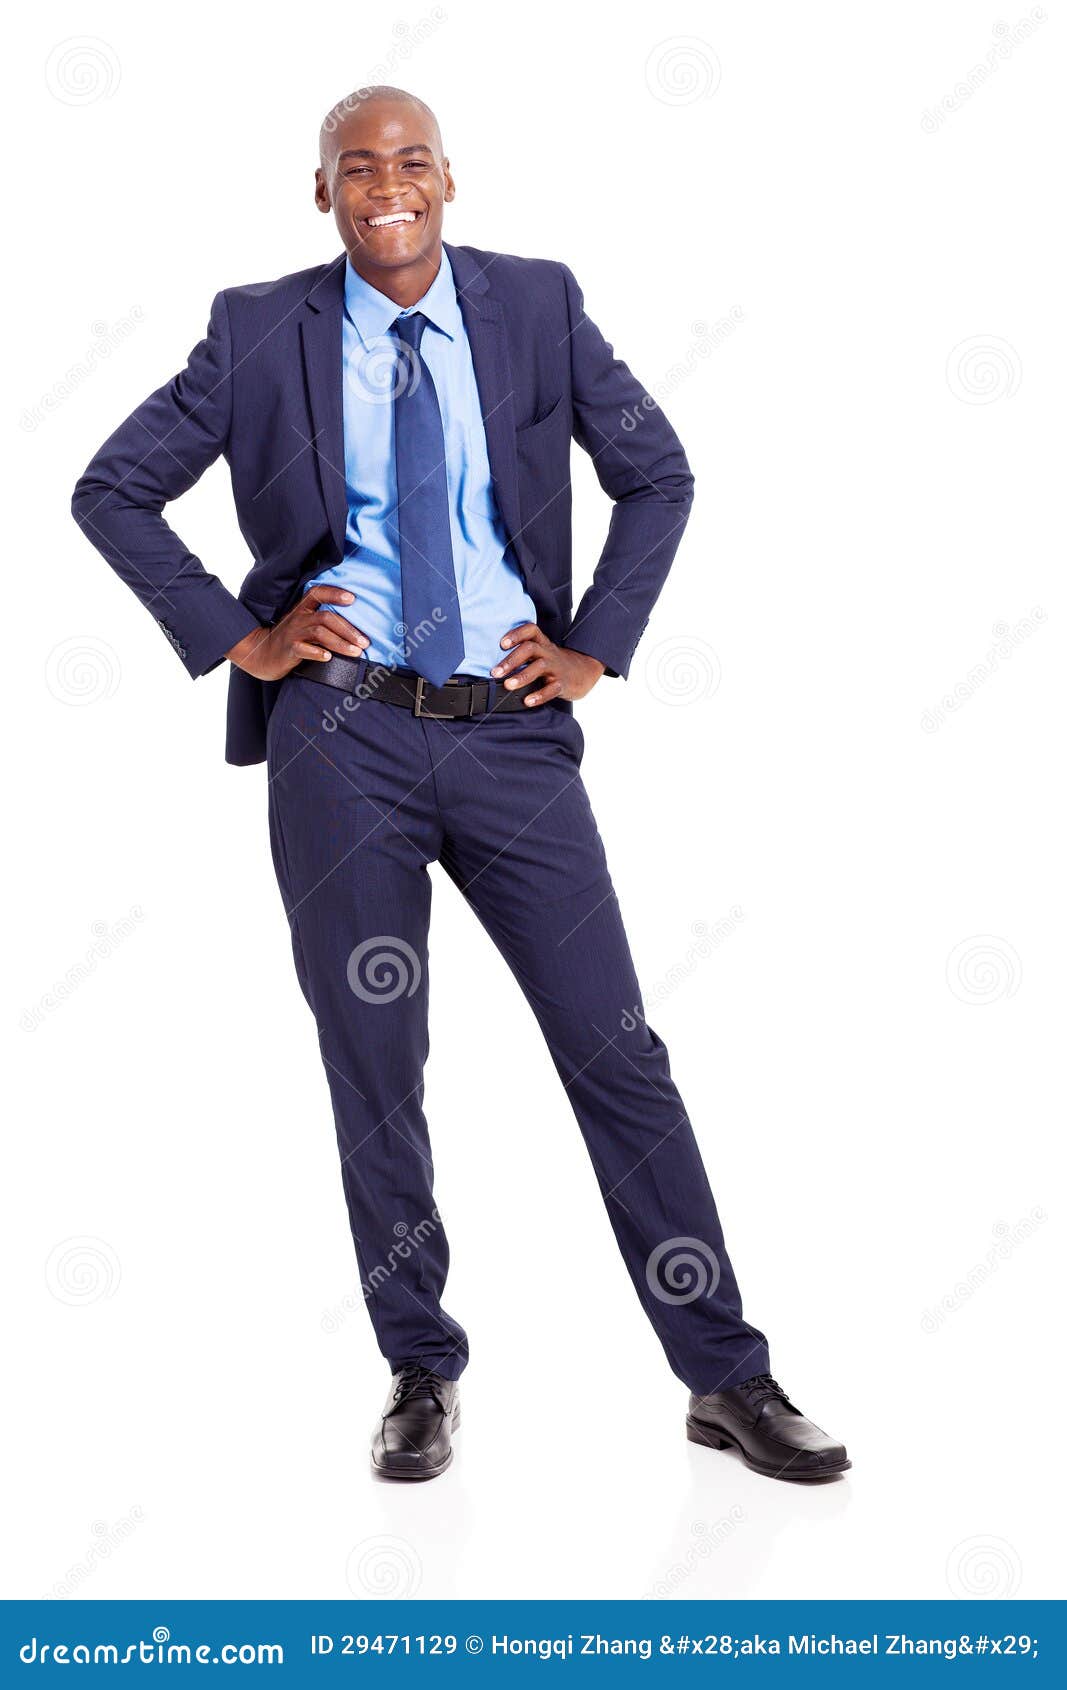 African American Businessman Stock Image - Image of professional, good ...